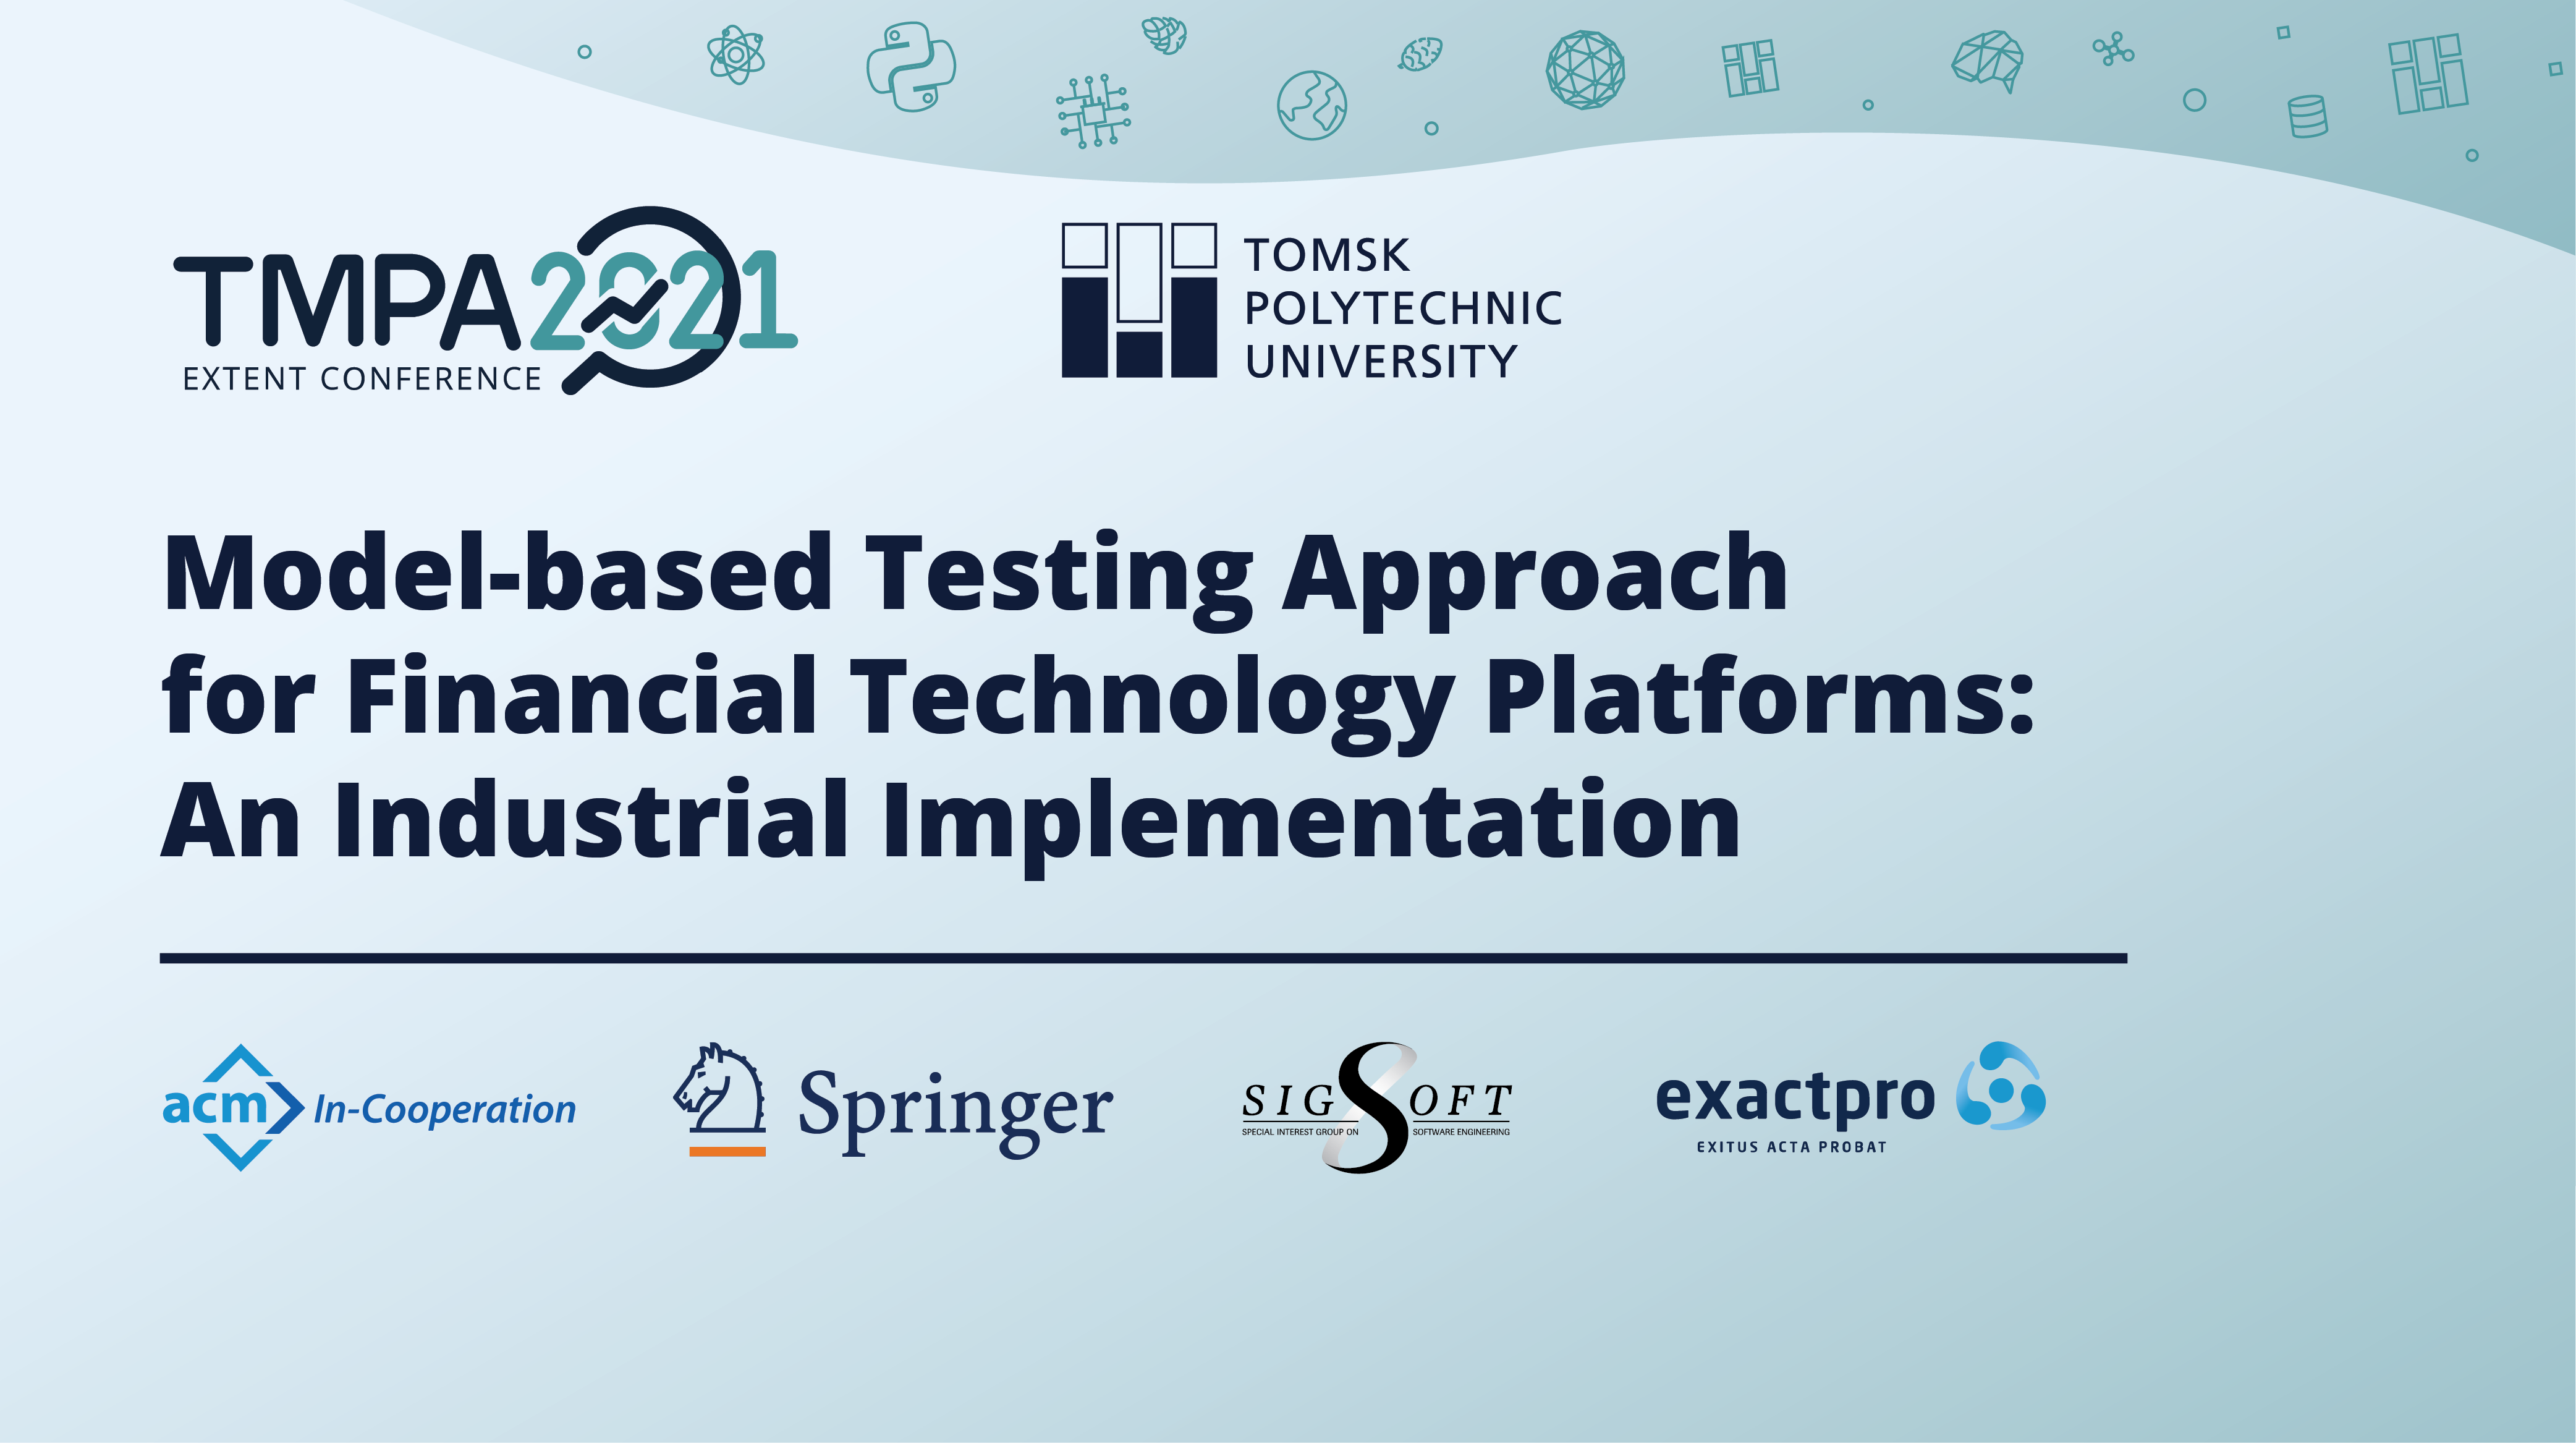 Model-based Testing Approach for Financial Technology Platforms: An Industrial Implementation